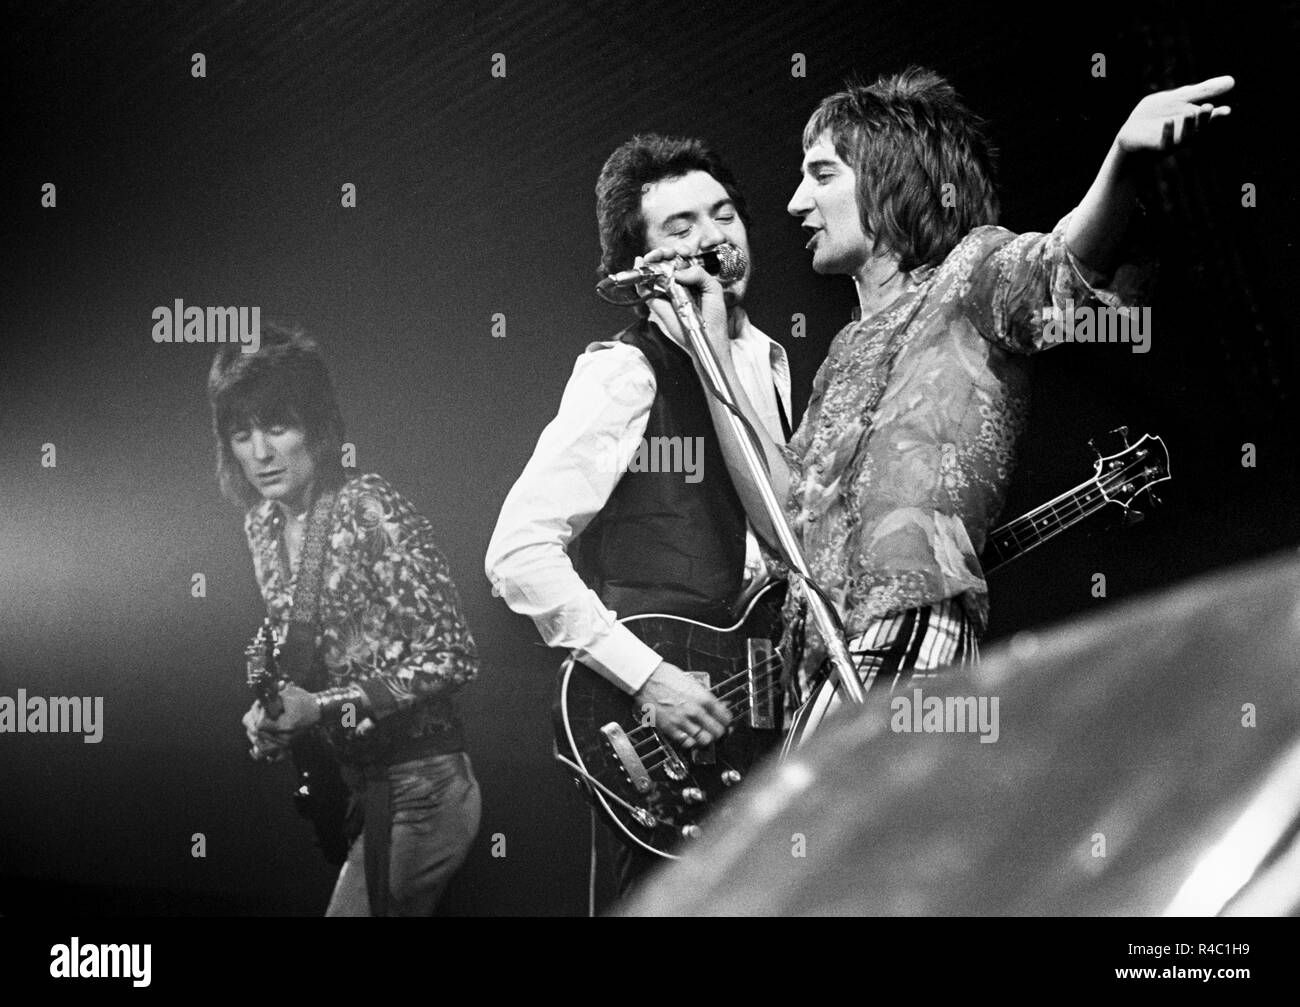 Rod Stewart of the Faces with Ronnie Wood and Ronnie Lane perform on stage on the Pop Gala TV show on 10th March 1973 in the Netherlands. L-R Ronnie Wood, Ronnie Lane, Rod Stewart,  . (Photo Gijsbert Hanekroot) Stock Photo